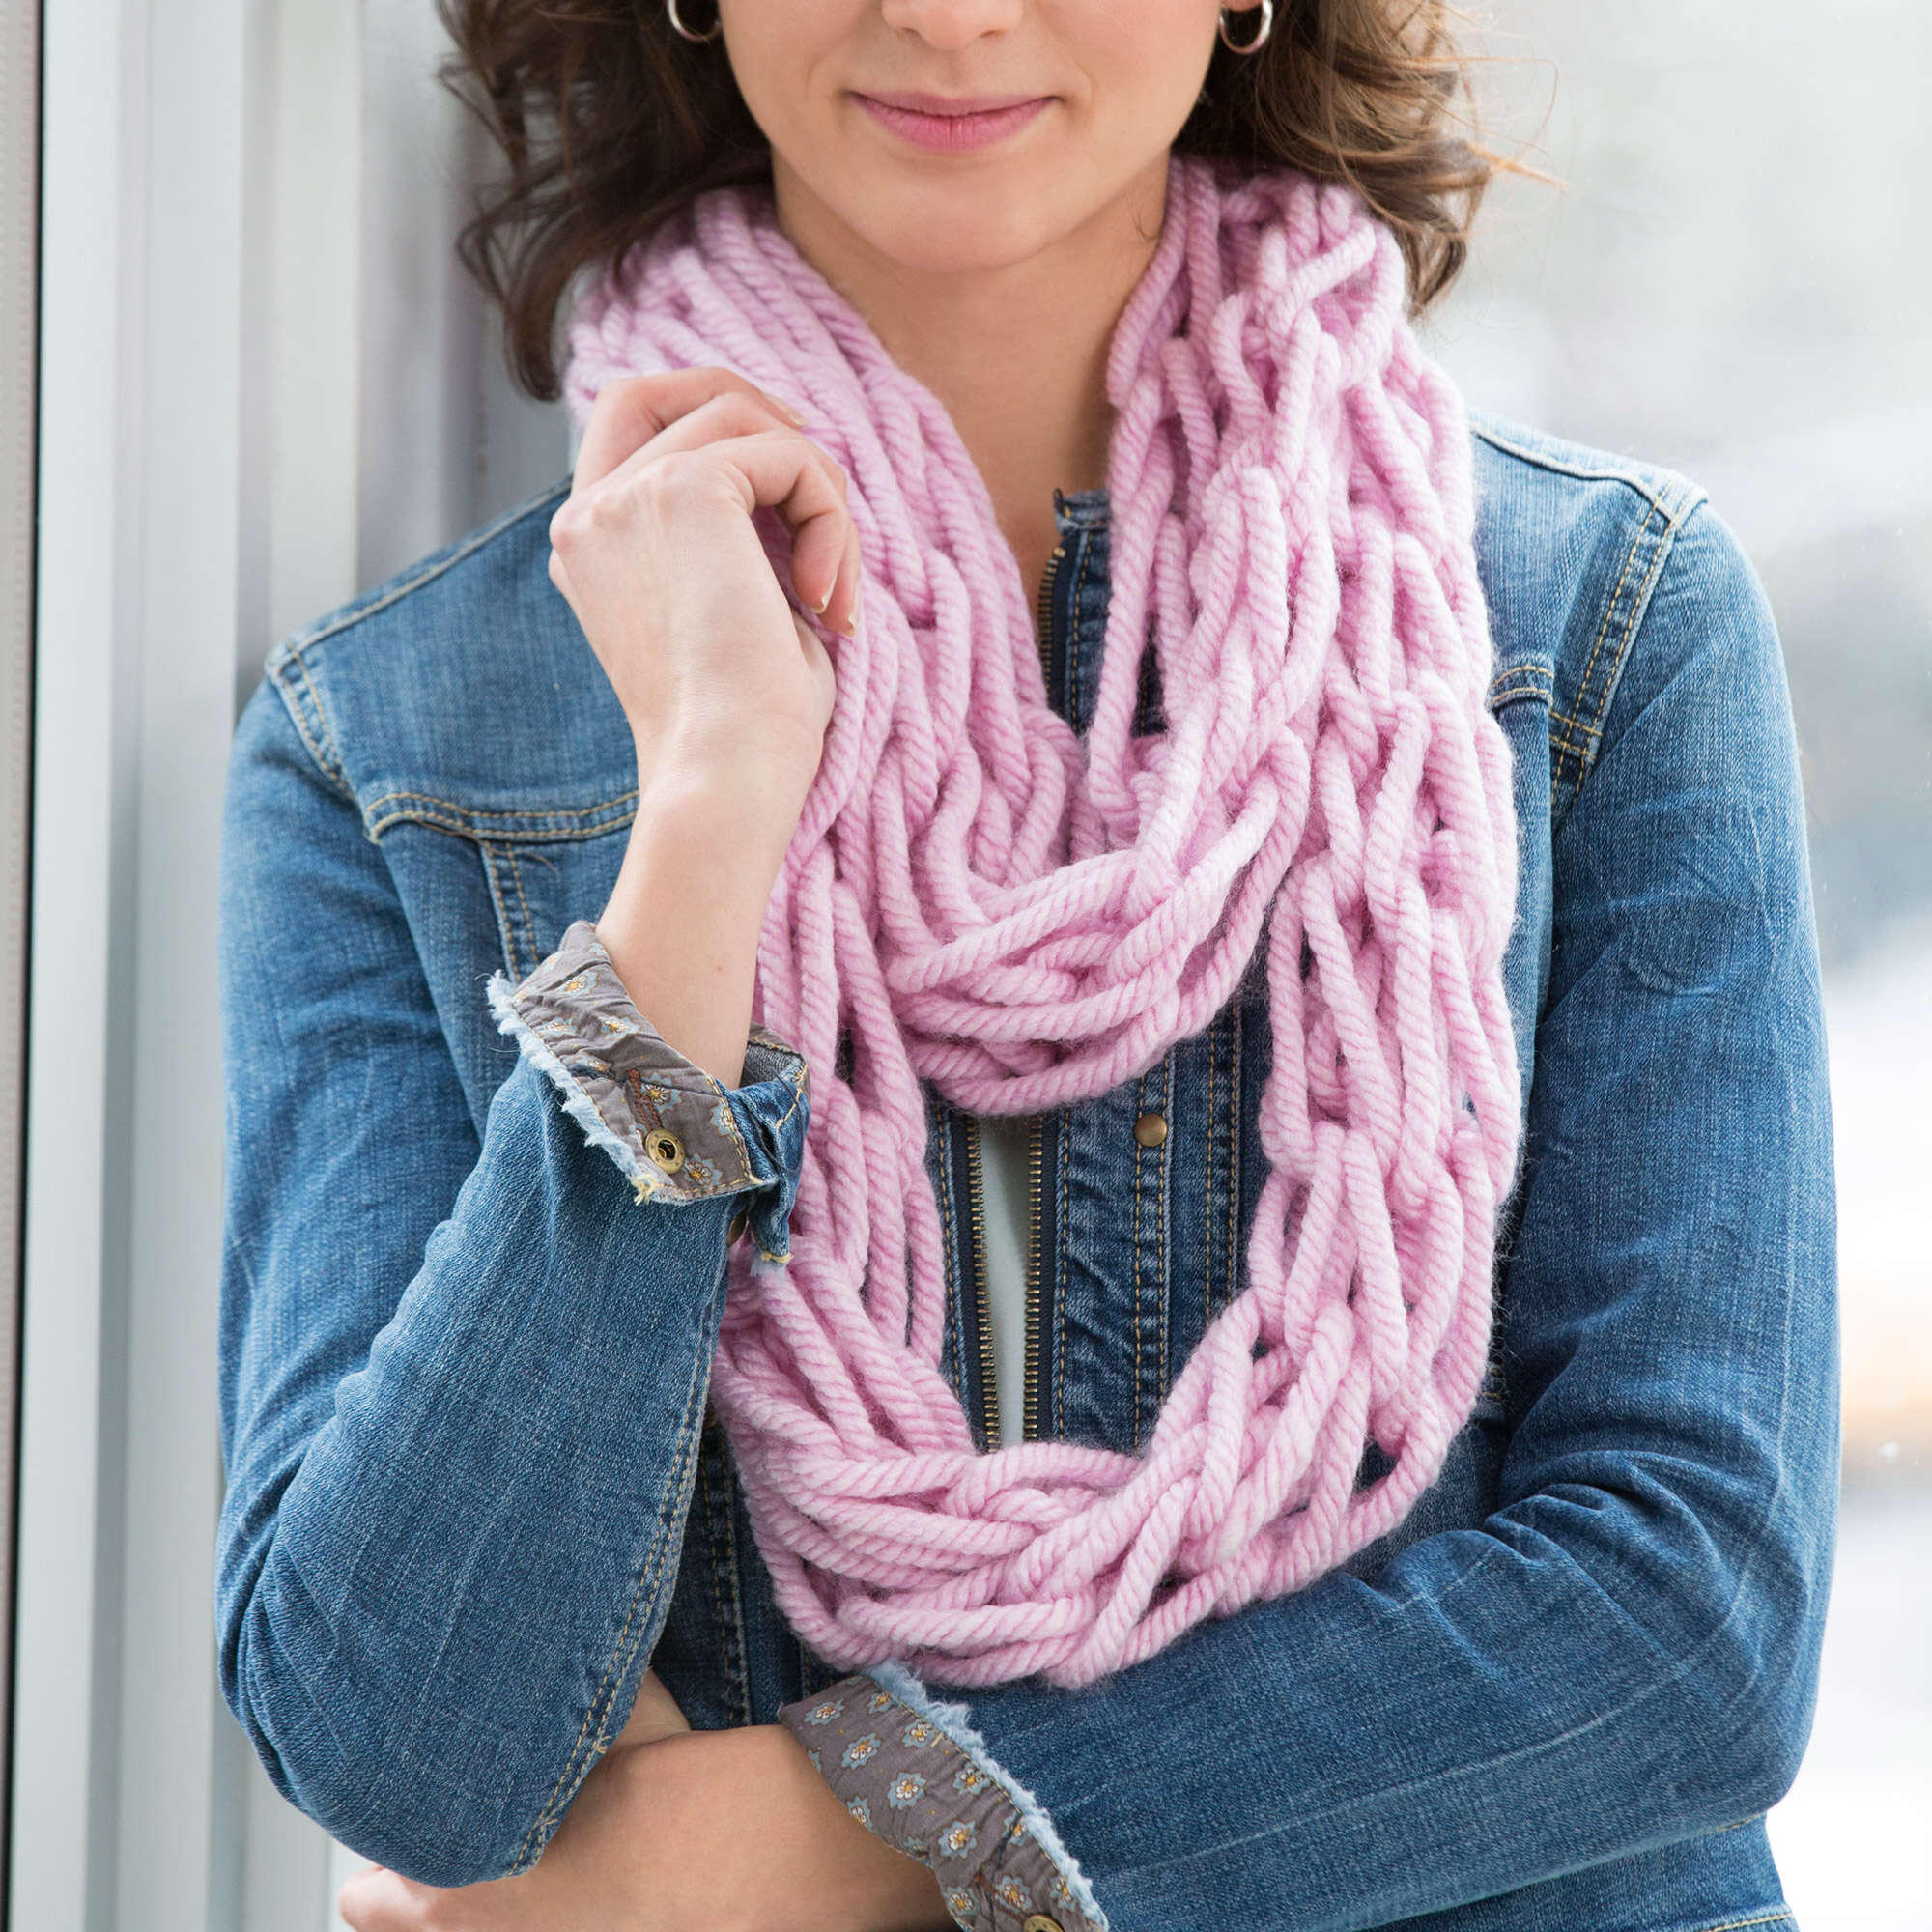 How to Finger Knit With Loop Yarn Video Tutorial + Free Cowl Pattern